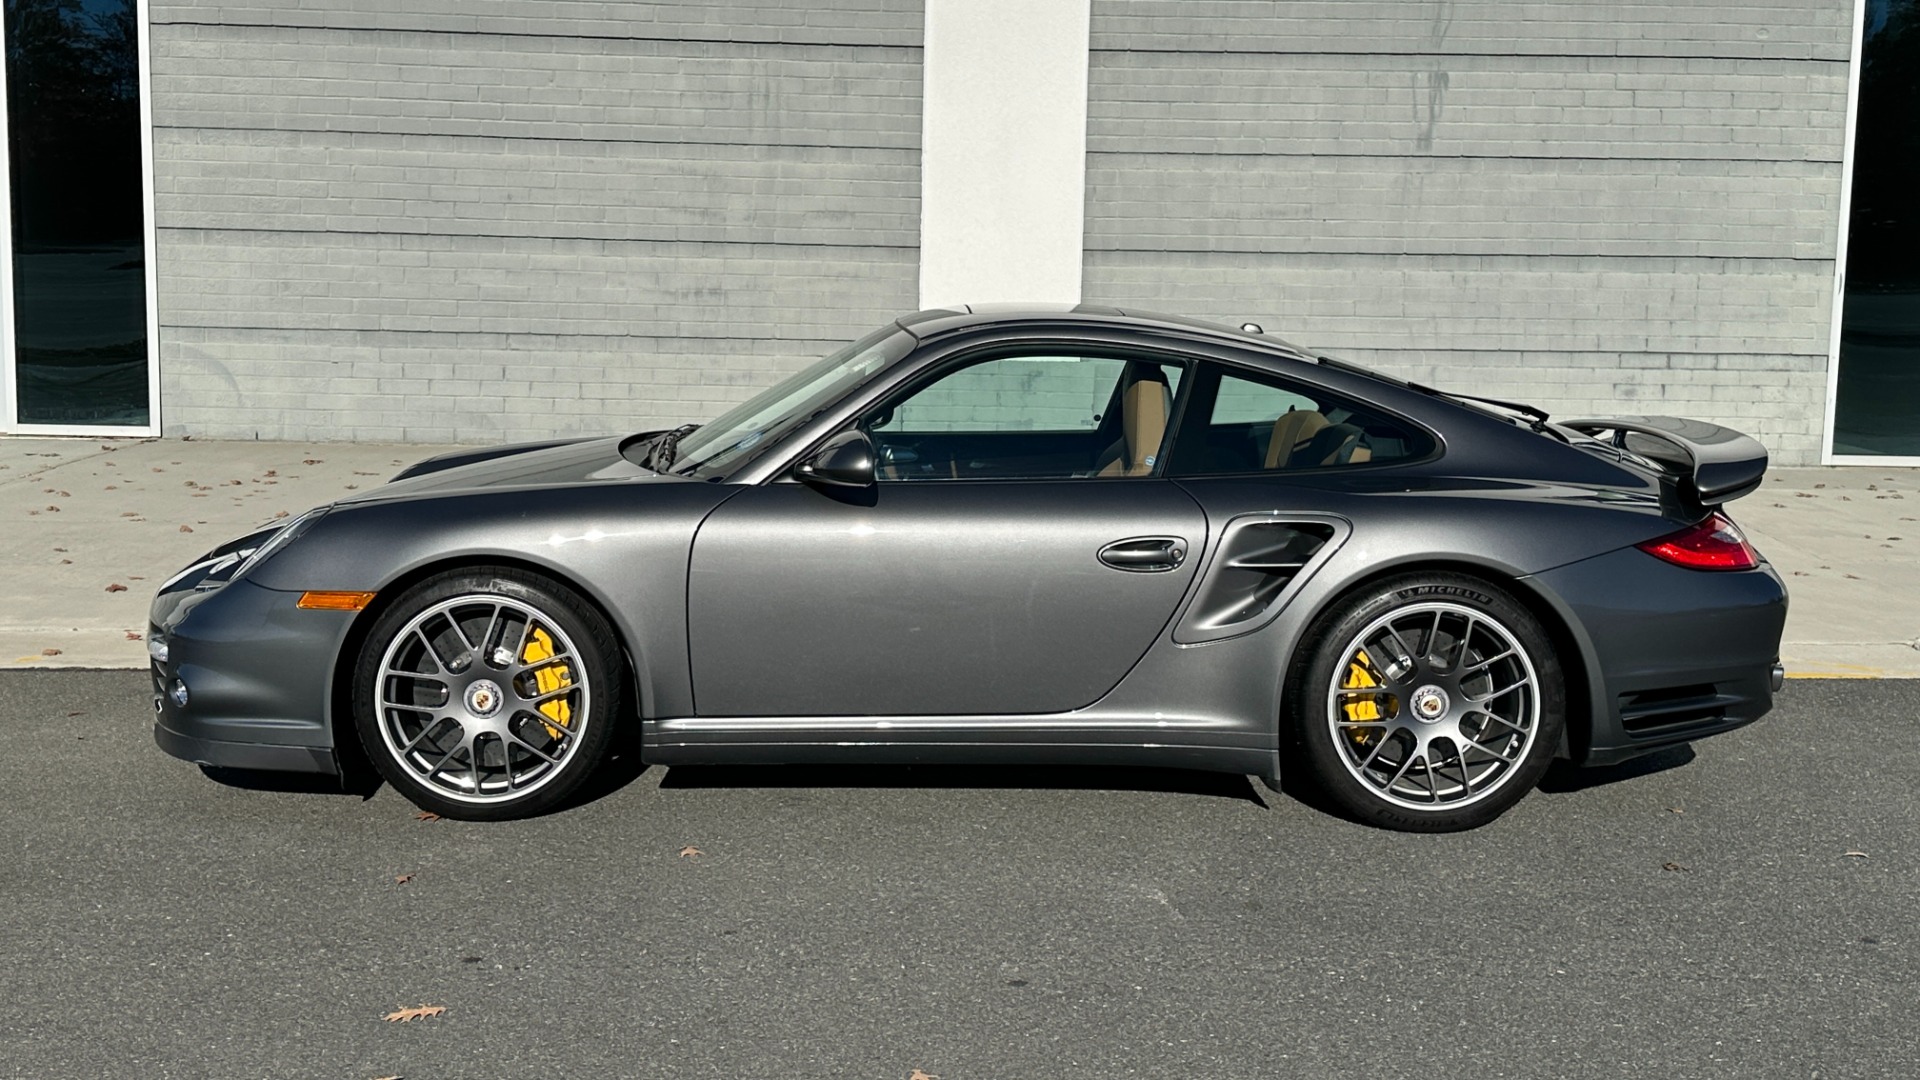 Used 2012 Porsche 911 TURBO S / CENTER LOCK WHEELS / FULL LEATHER INTERIOR / YELLOW CALIPERS / PA for sale $138,999 at Formula Imports in Charlotte NC 28227 3